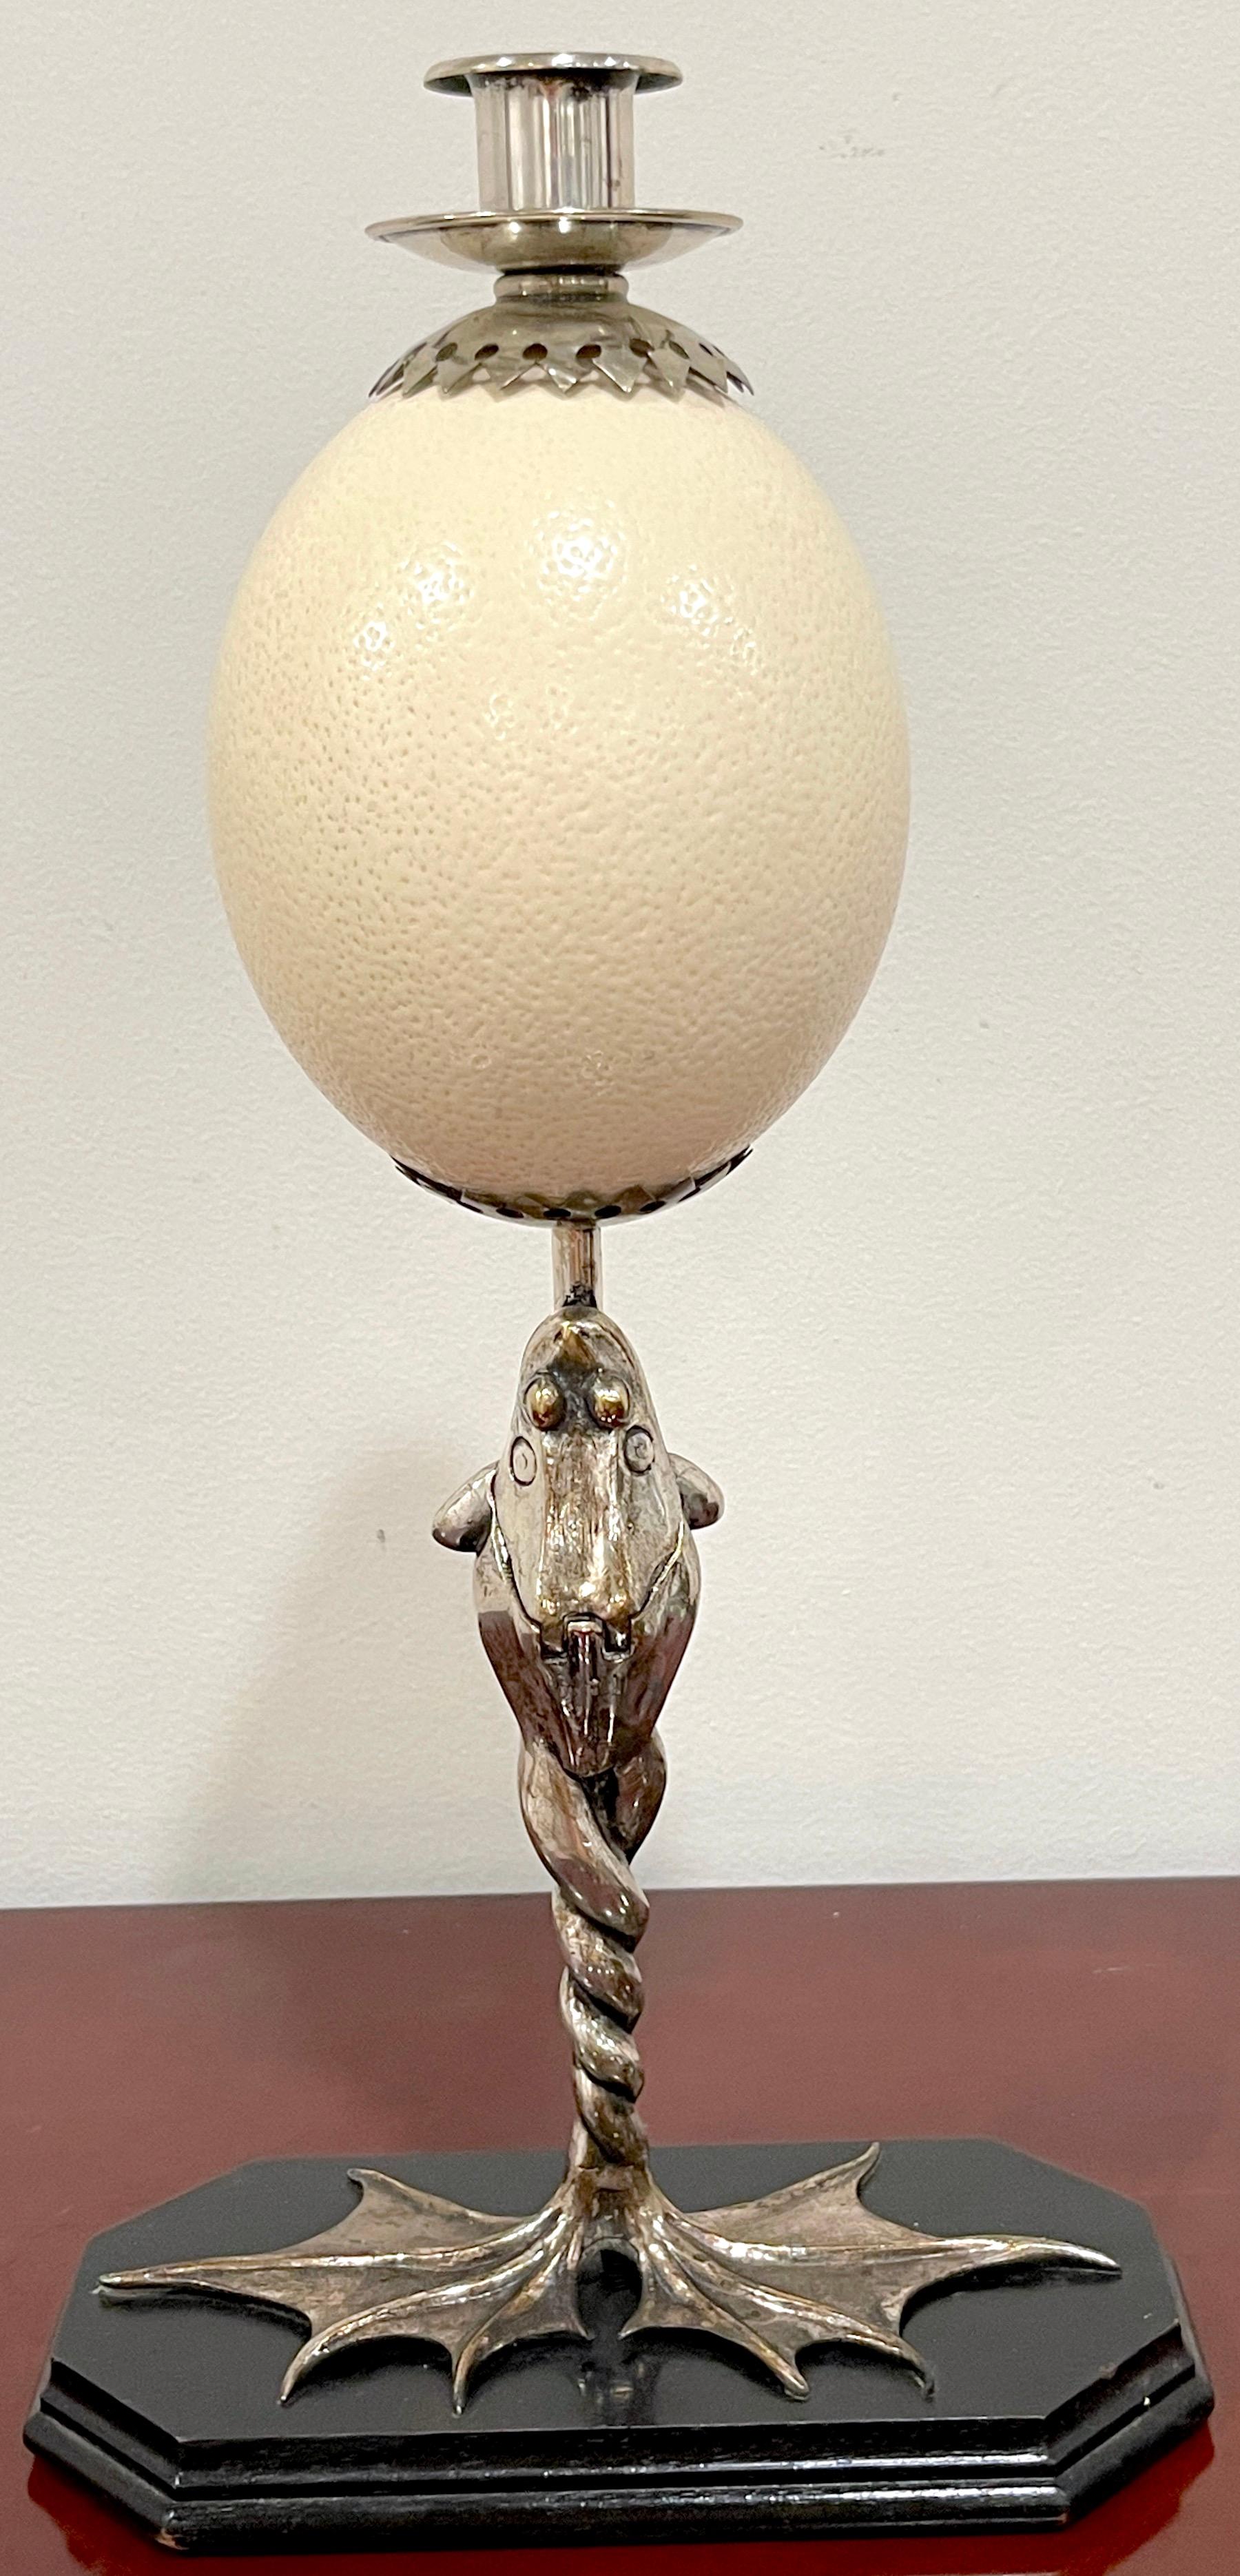 Anthony Redmile Silverplated Figural Frog Mounted Ostrich Egg Candlestick
Stamped 'Redmile London'
London, Circa 1970s 
Fashioned as a standing a 17.5 -inch high silverplated -brass frog with intertwined legs, fitted with a hinged match compartment,